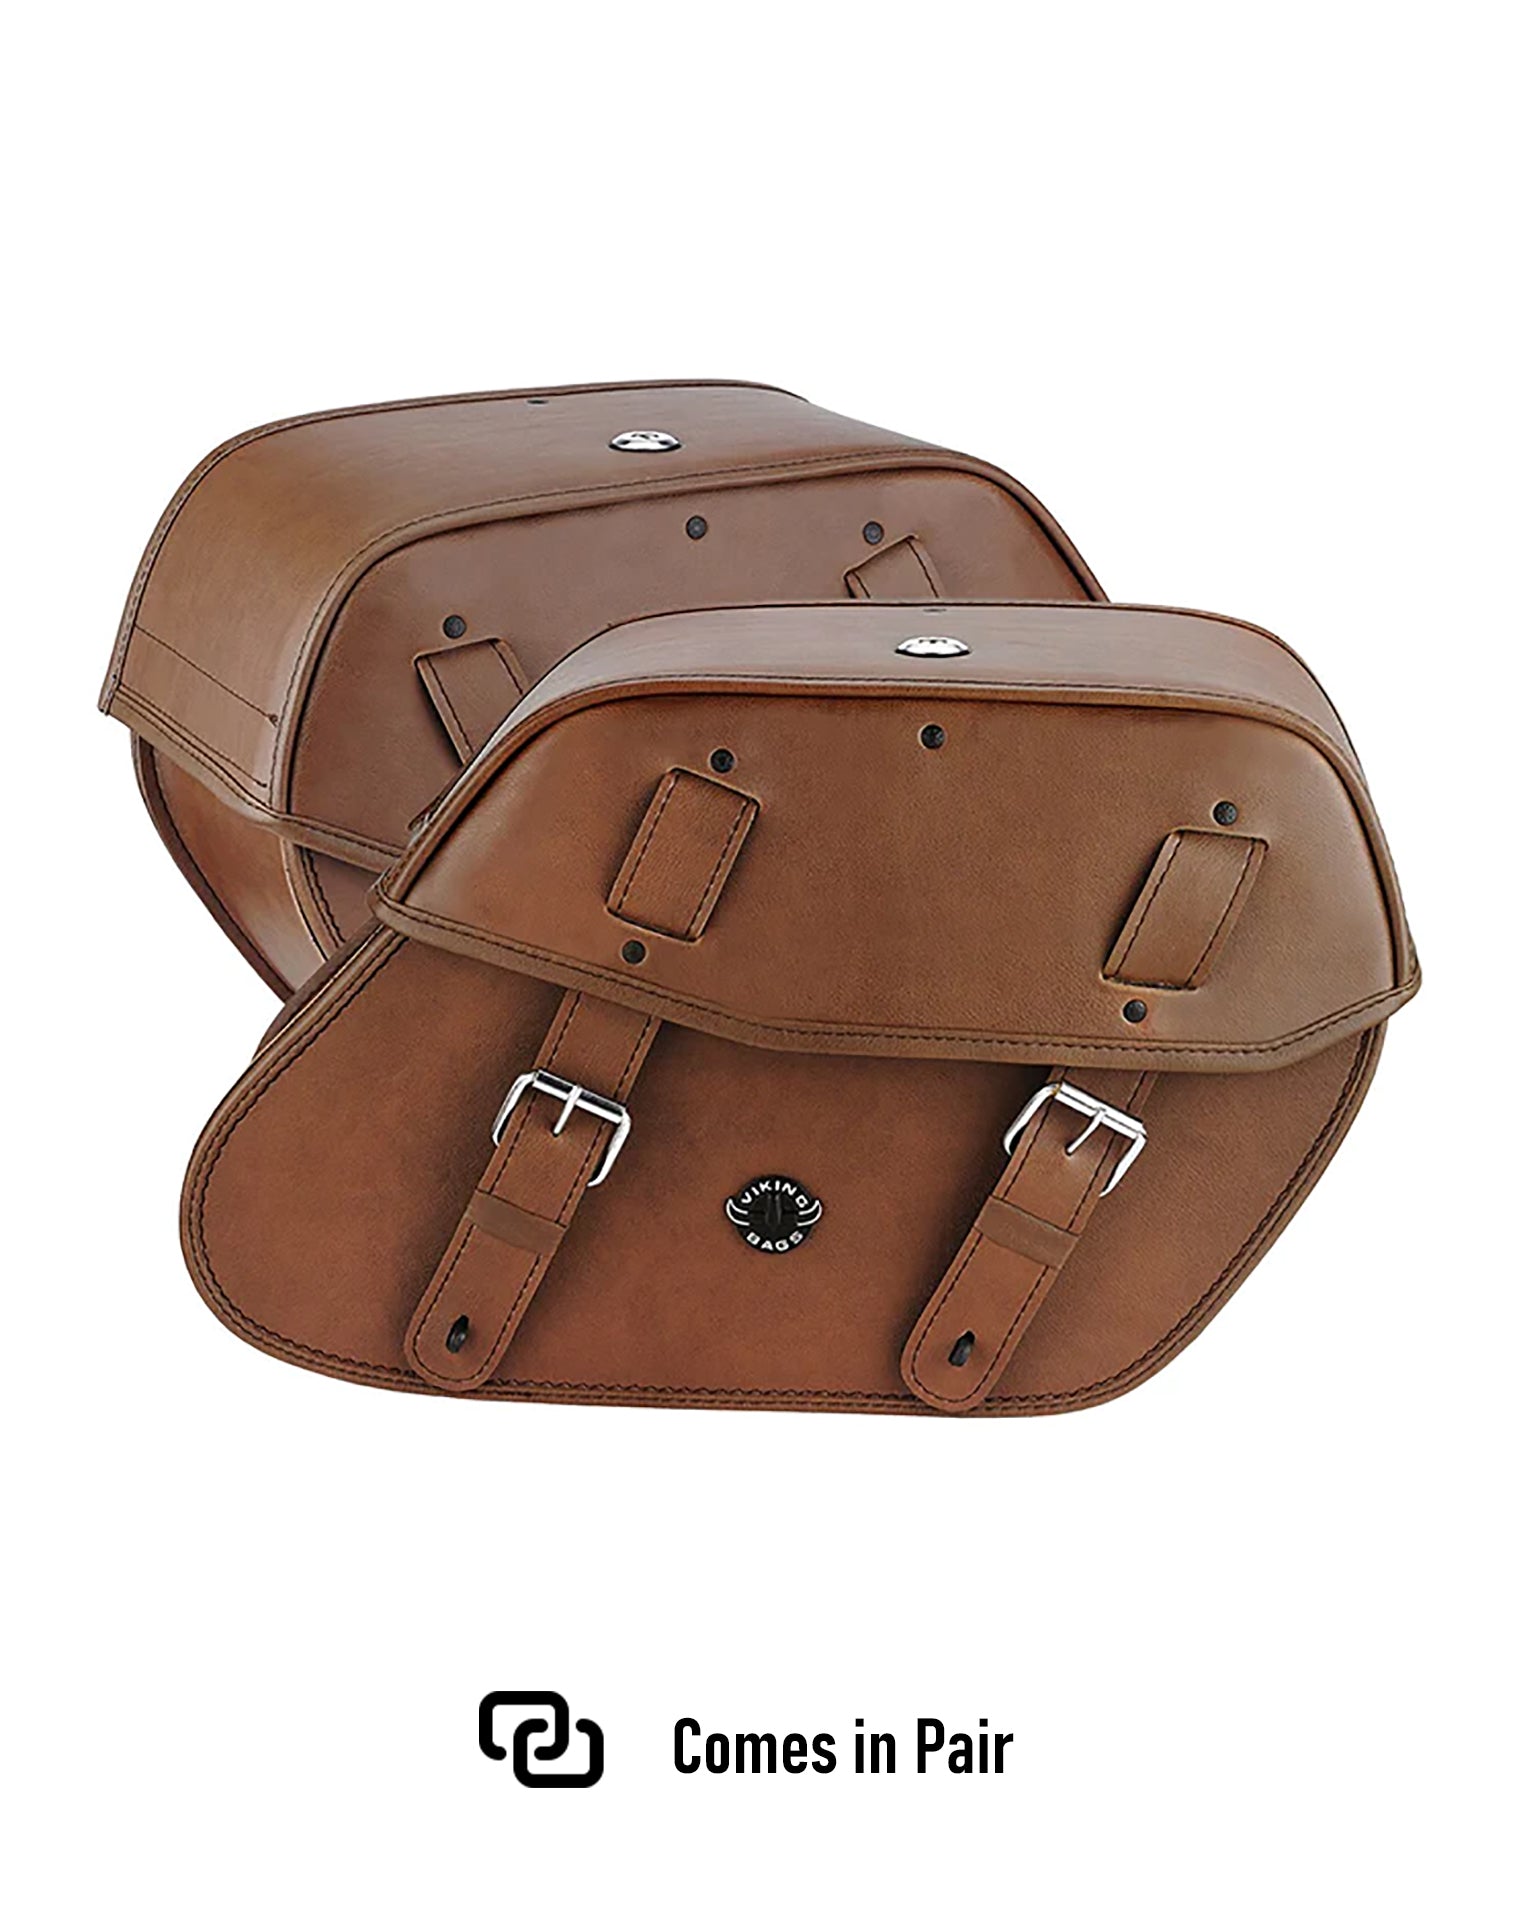 Viking Odin Brown Large Victory Judge Leather Motorcycle Saddlebags Weather Resistant Bags Comes in Pair